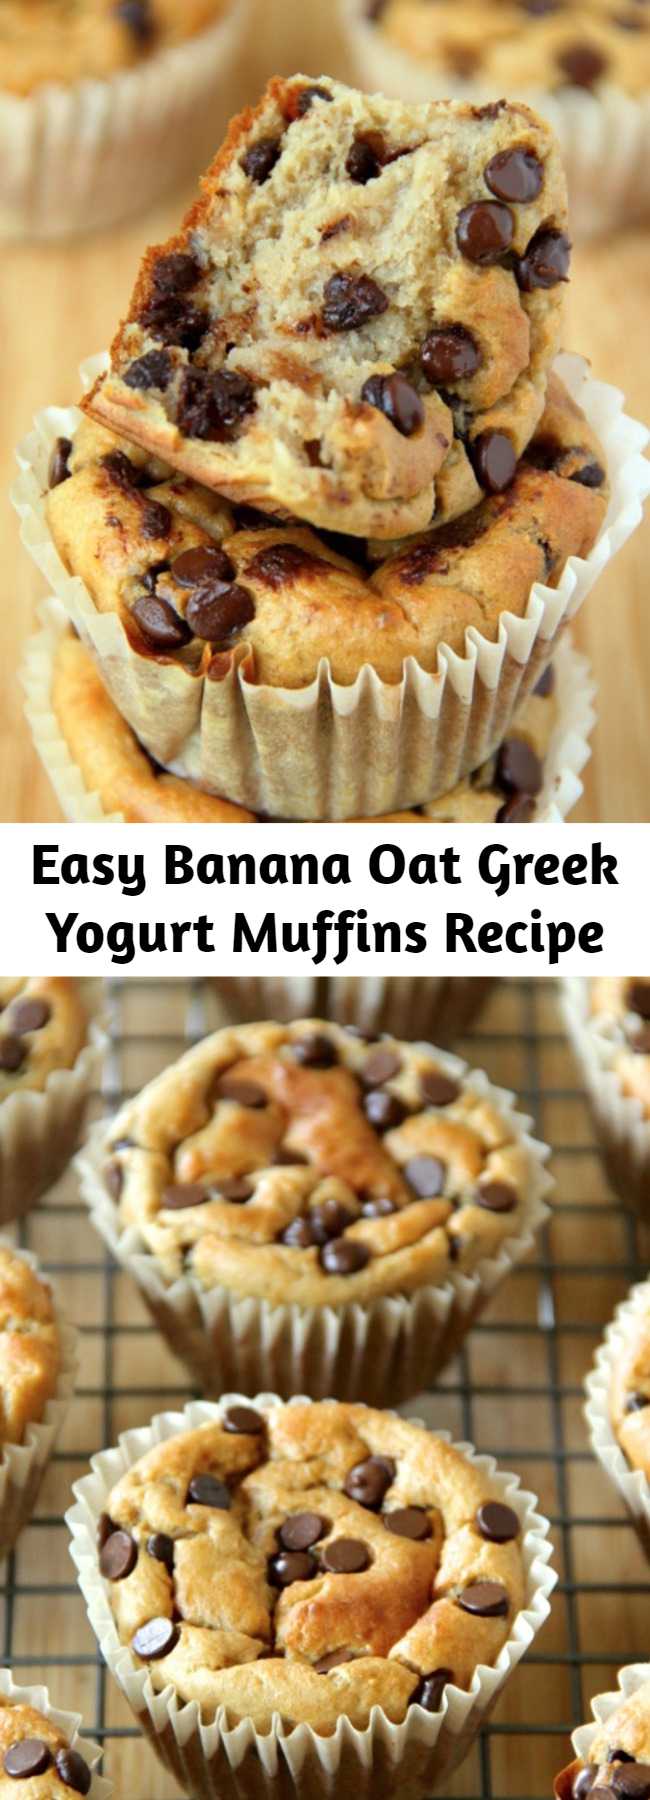 Easy Banana Oat Greek Yogurt Muffins Recipe - Made with no flour or oil, these Banana Oat Greek Yogurt Muffins make for a deliciously healthy breakfast or snack!